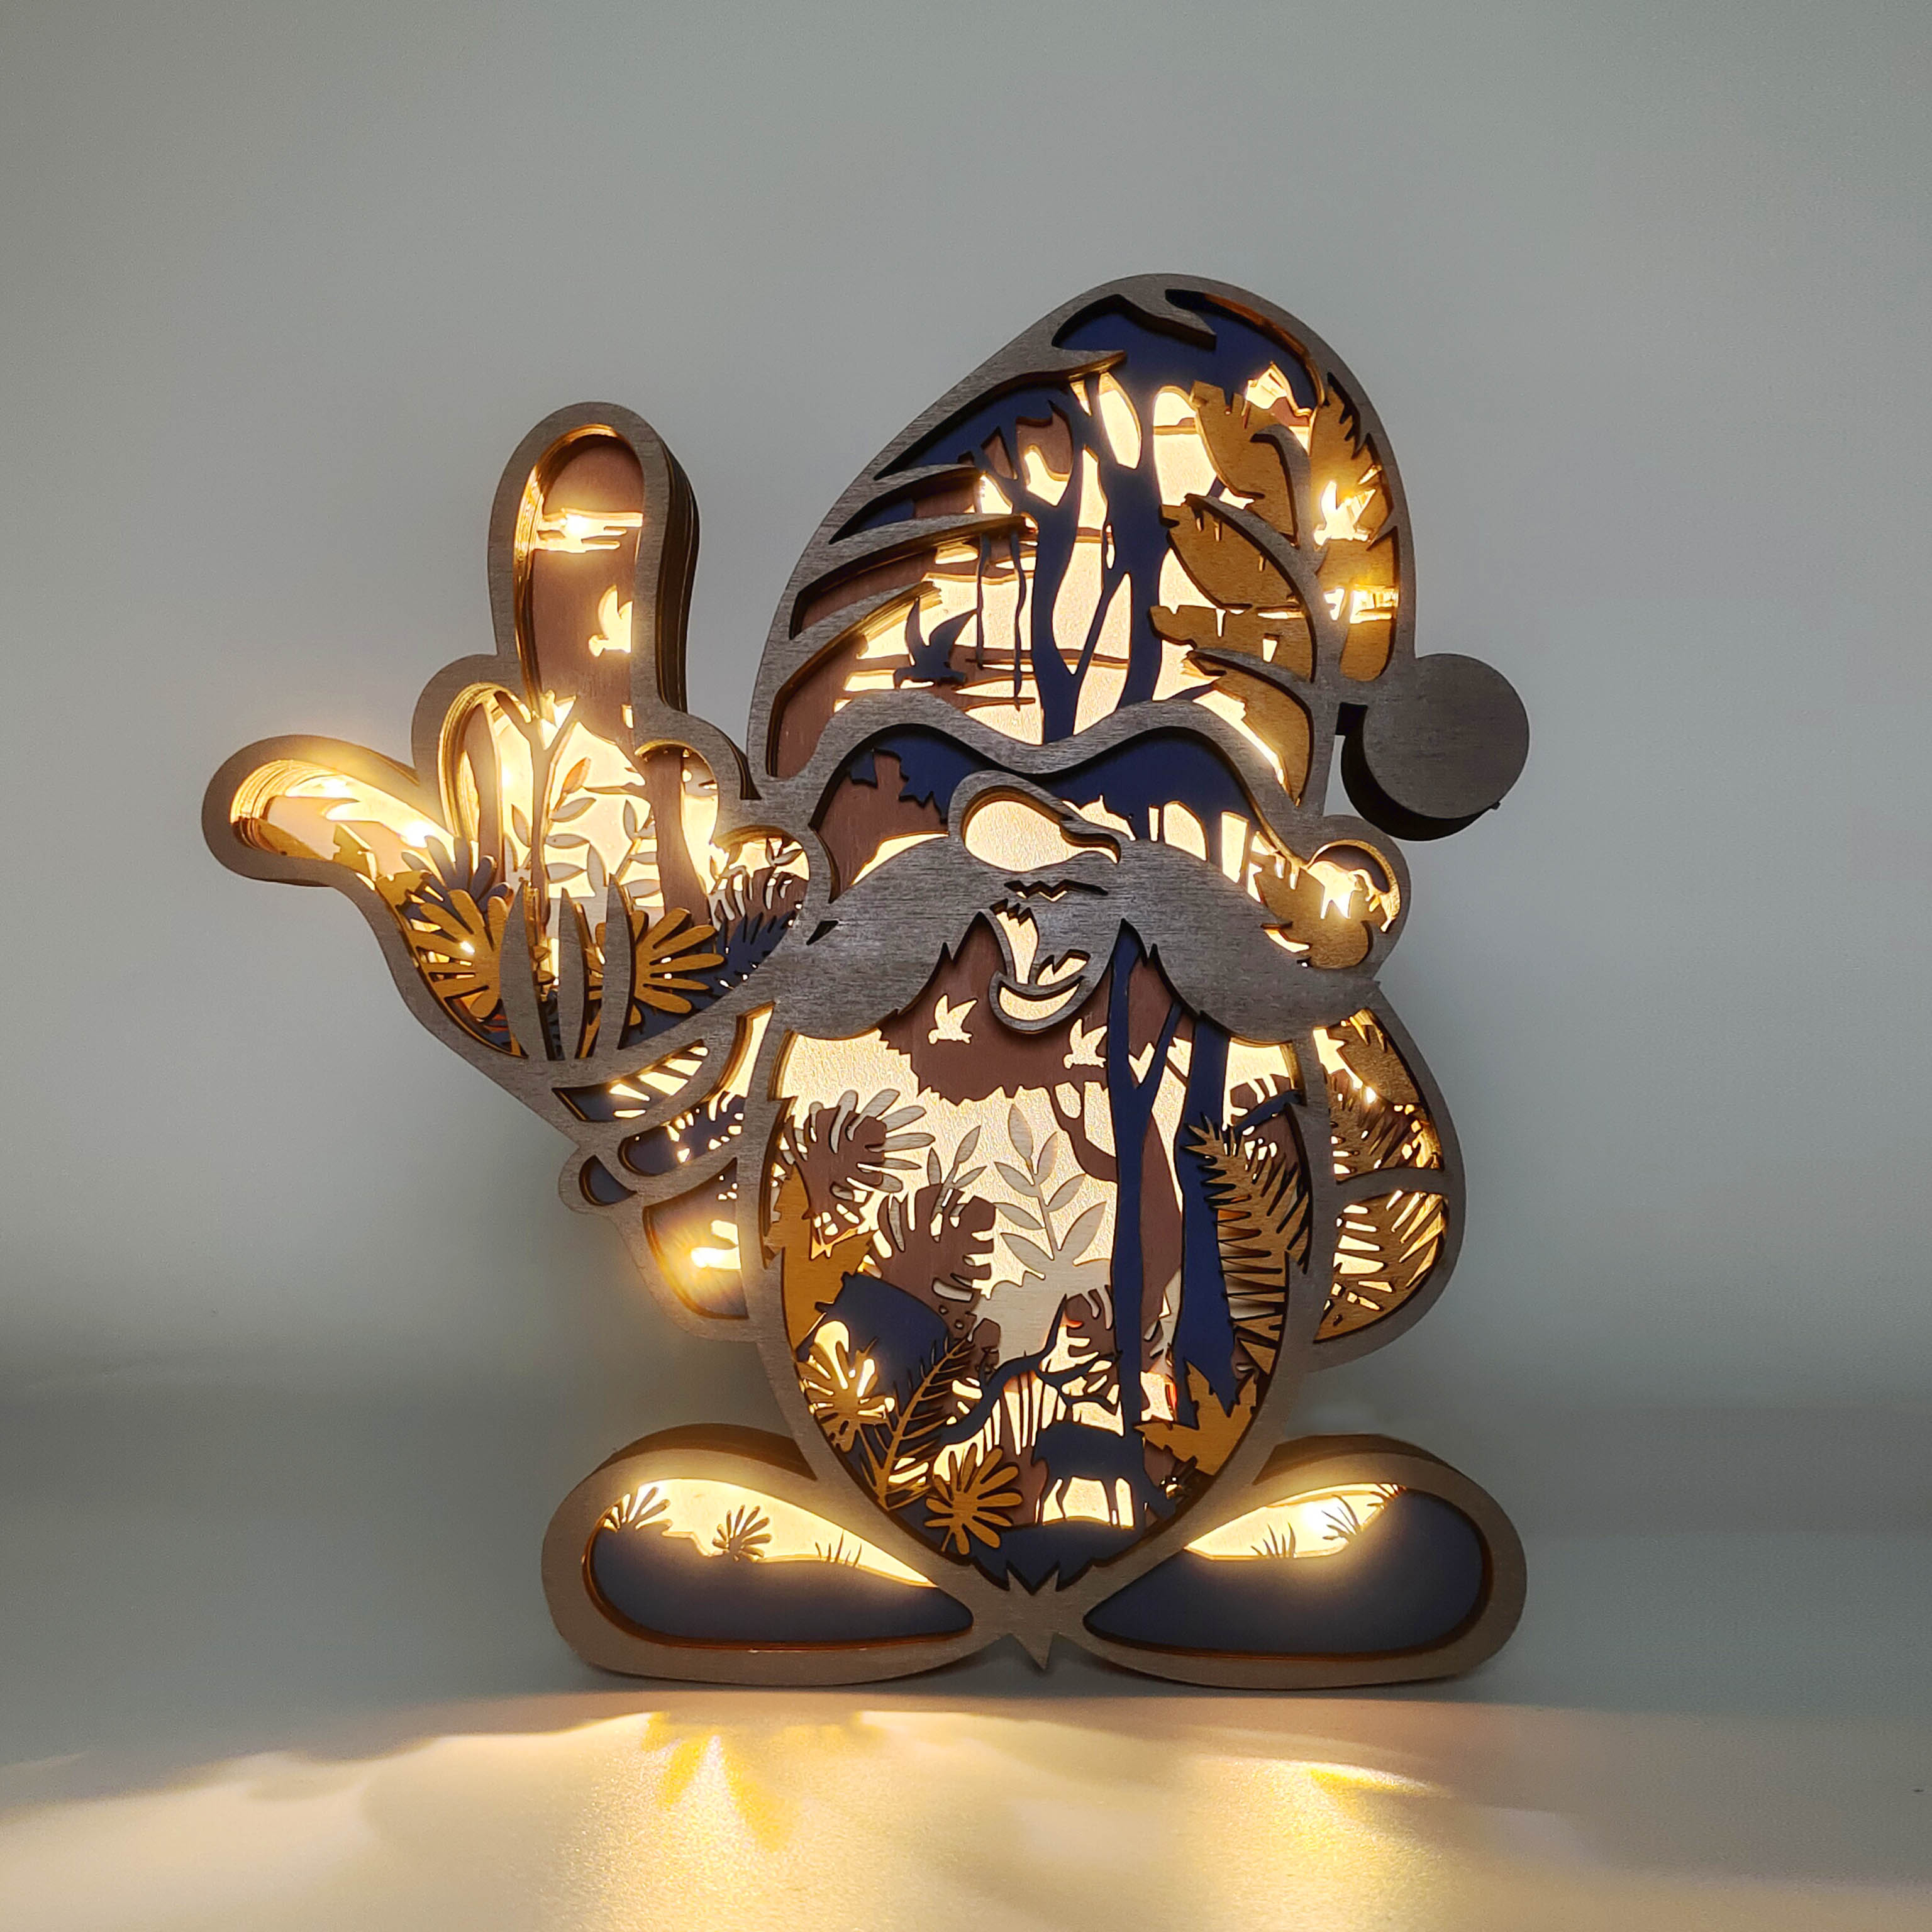 Grumpy Gnome Wooden Carving Light, Suitable For Bedroom, Bedside, Desk, Exquisite Night Light